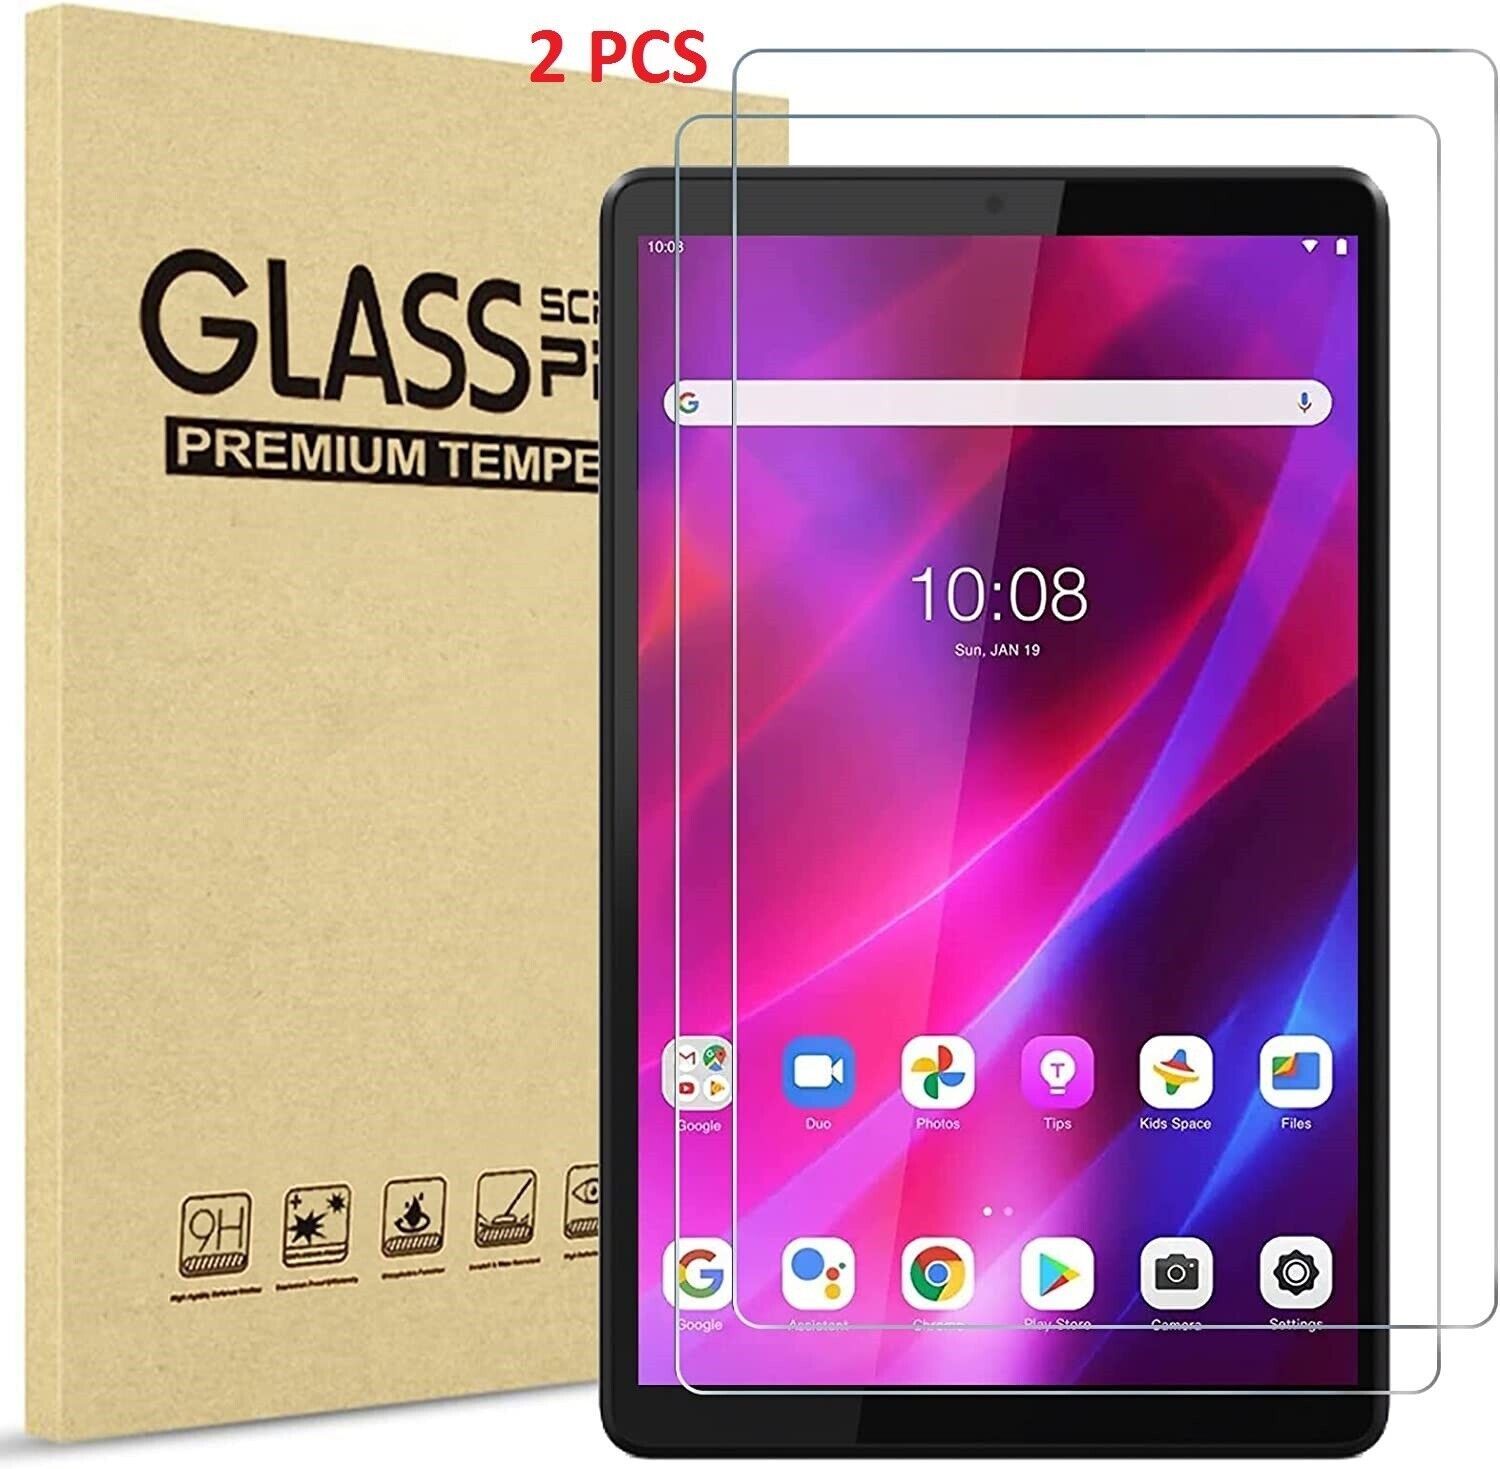 2 PCS Tempered Glass Screen Protector For BLU M8L / M8L Plus 8 Inch Tablet Cover